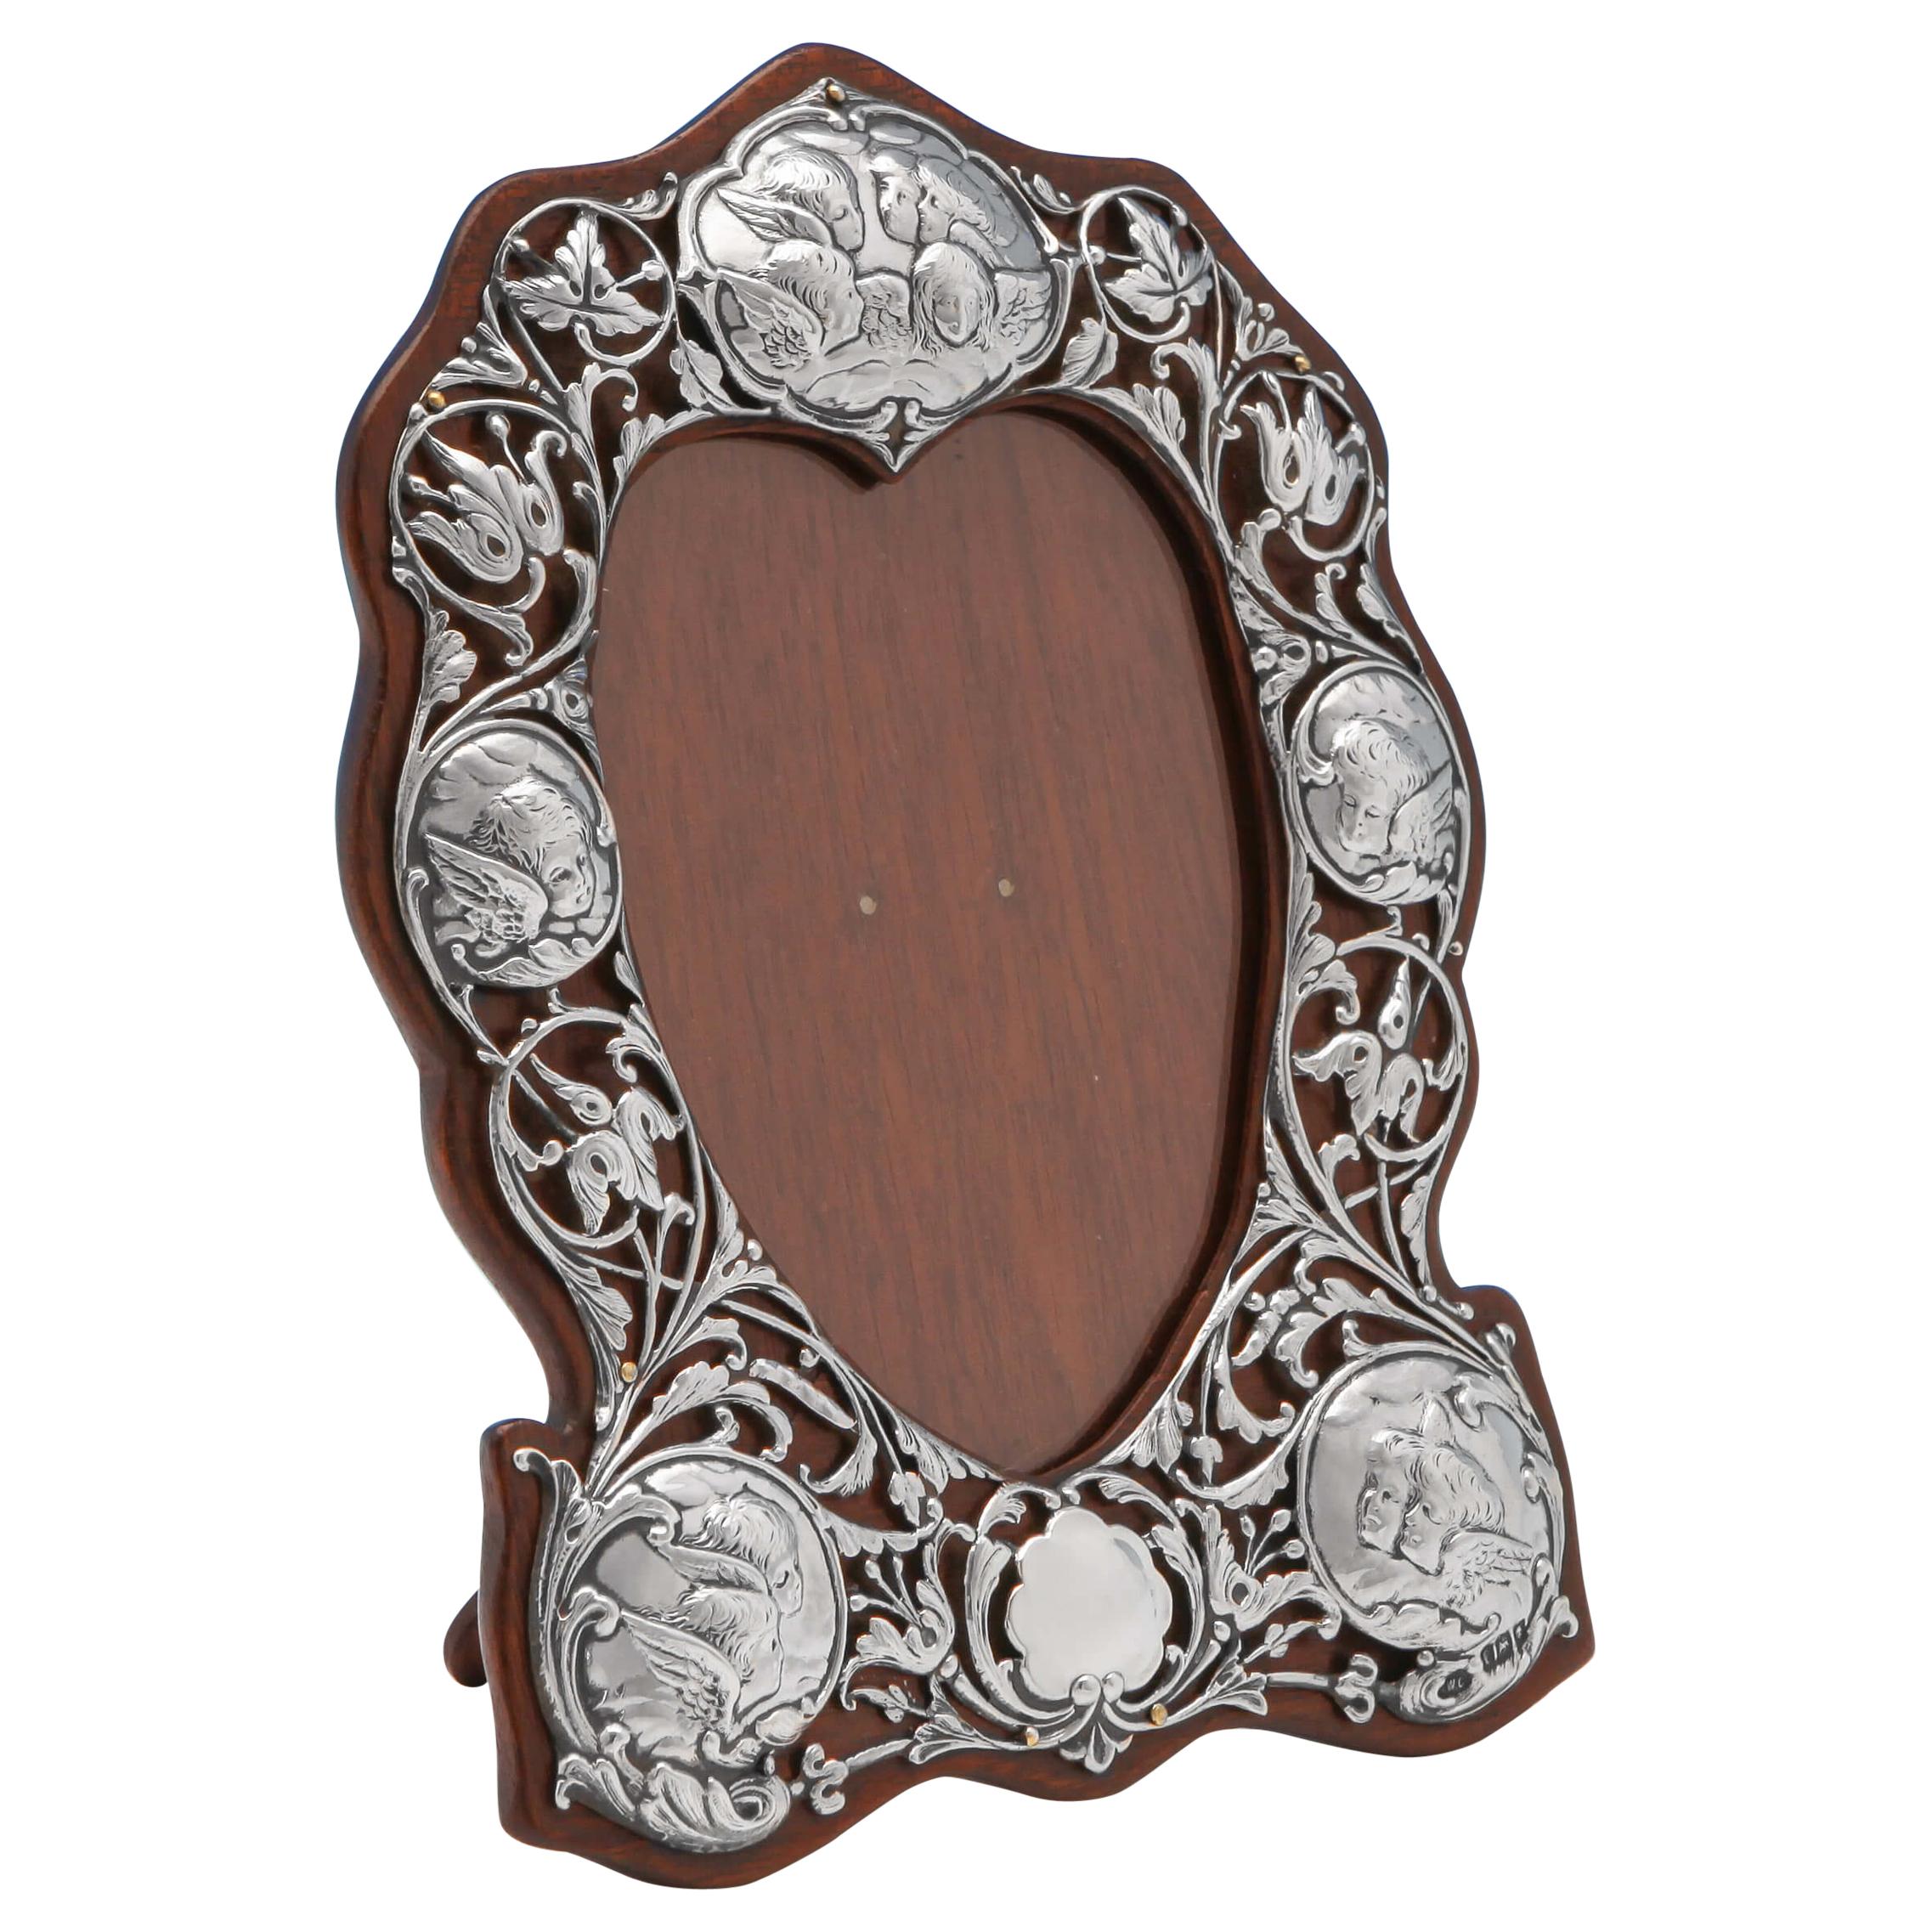 Heart Shaped Art Nouveau Antique Sterling Silver Photograph Frame from 1901